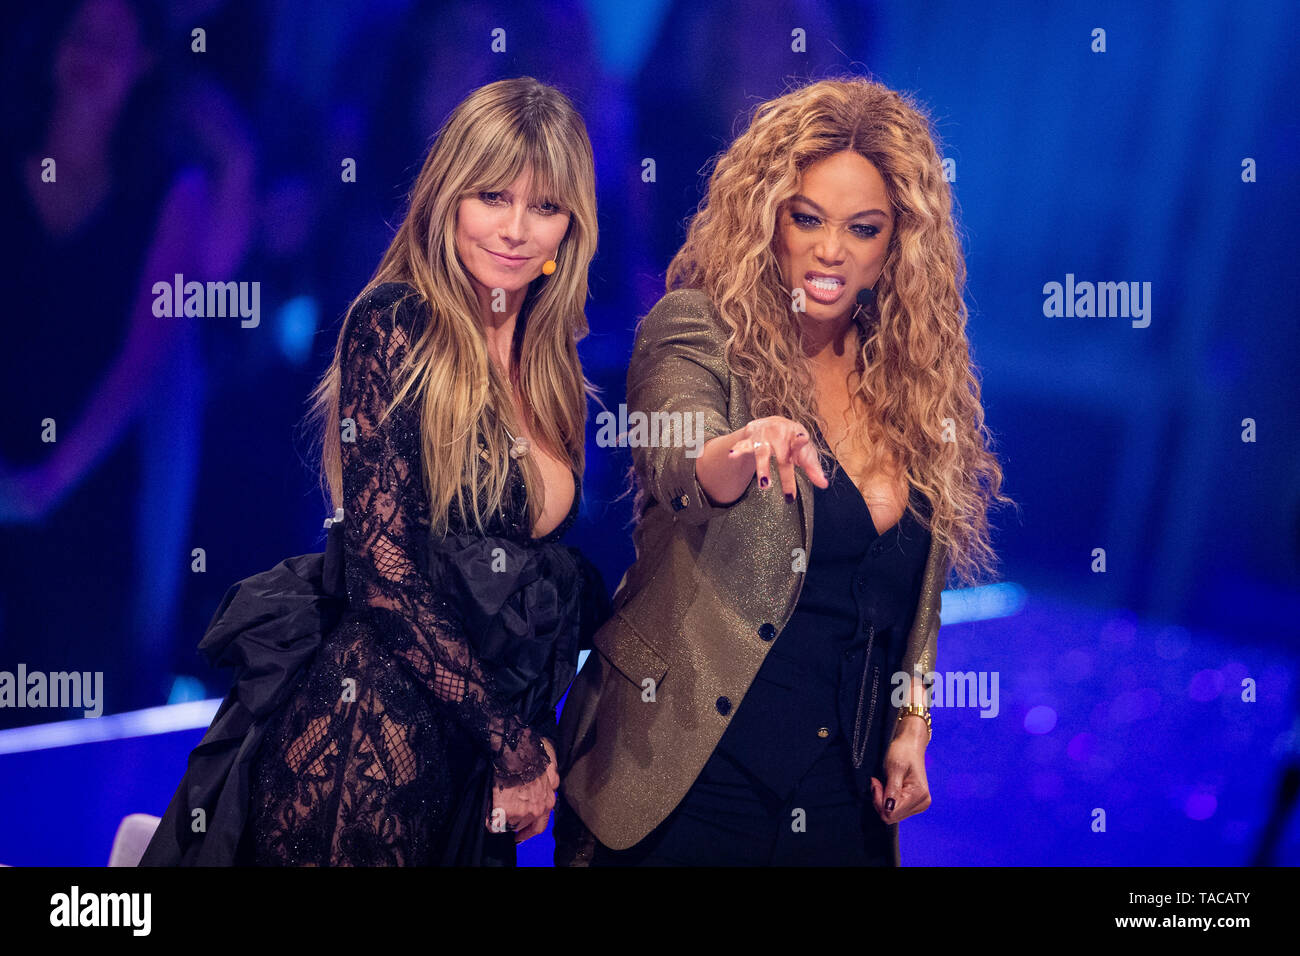 Duesseldorf, Germany. 23rd May, 2019. Heidi Klum (l), model and presenter,  and Tyra Banks, model, in the final of the 14th season of the casting show "Germany's  next Topmodel" at the ISS